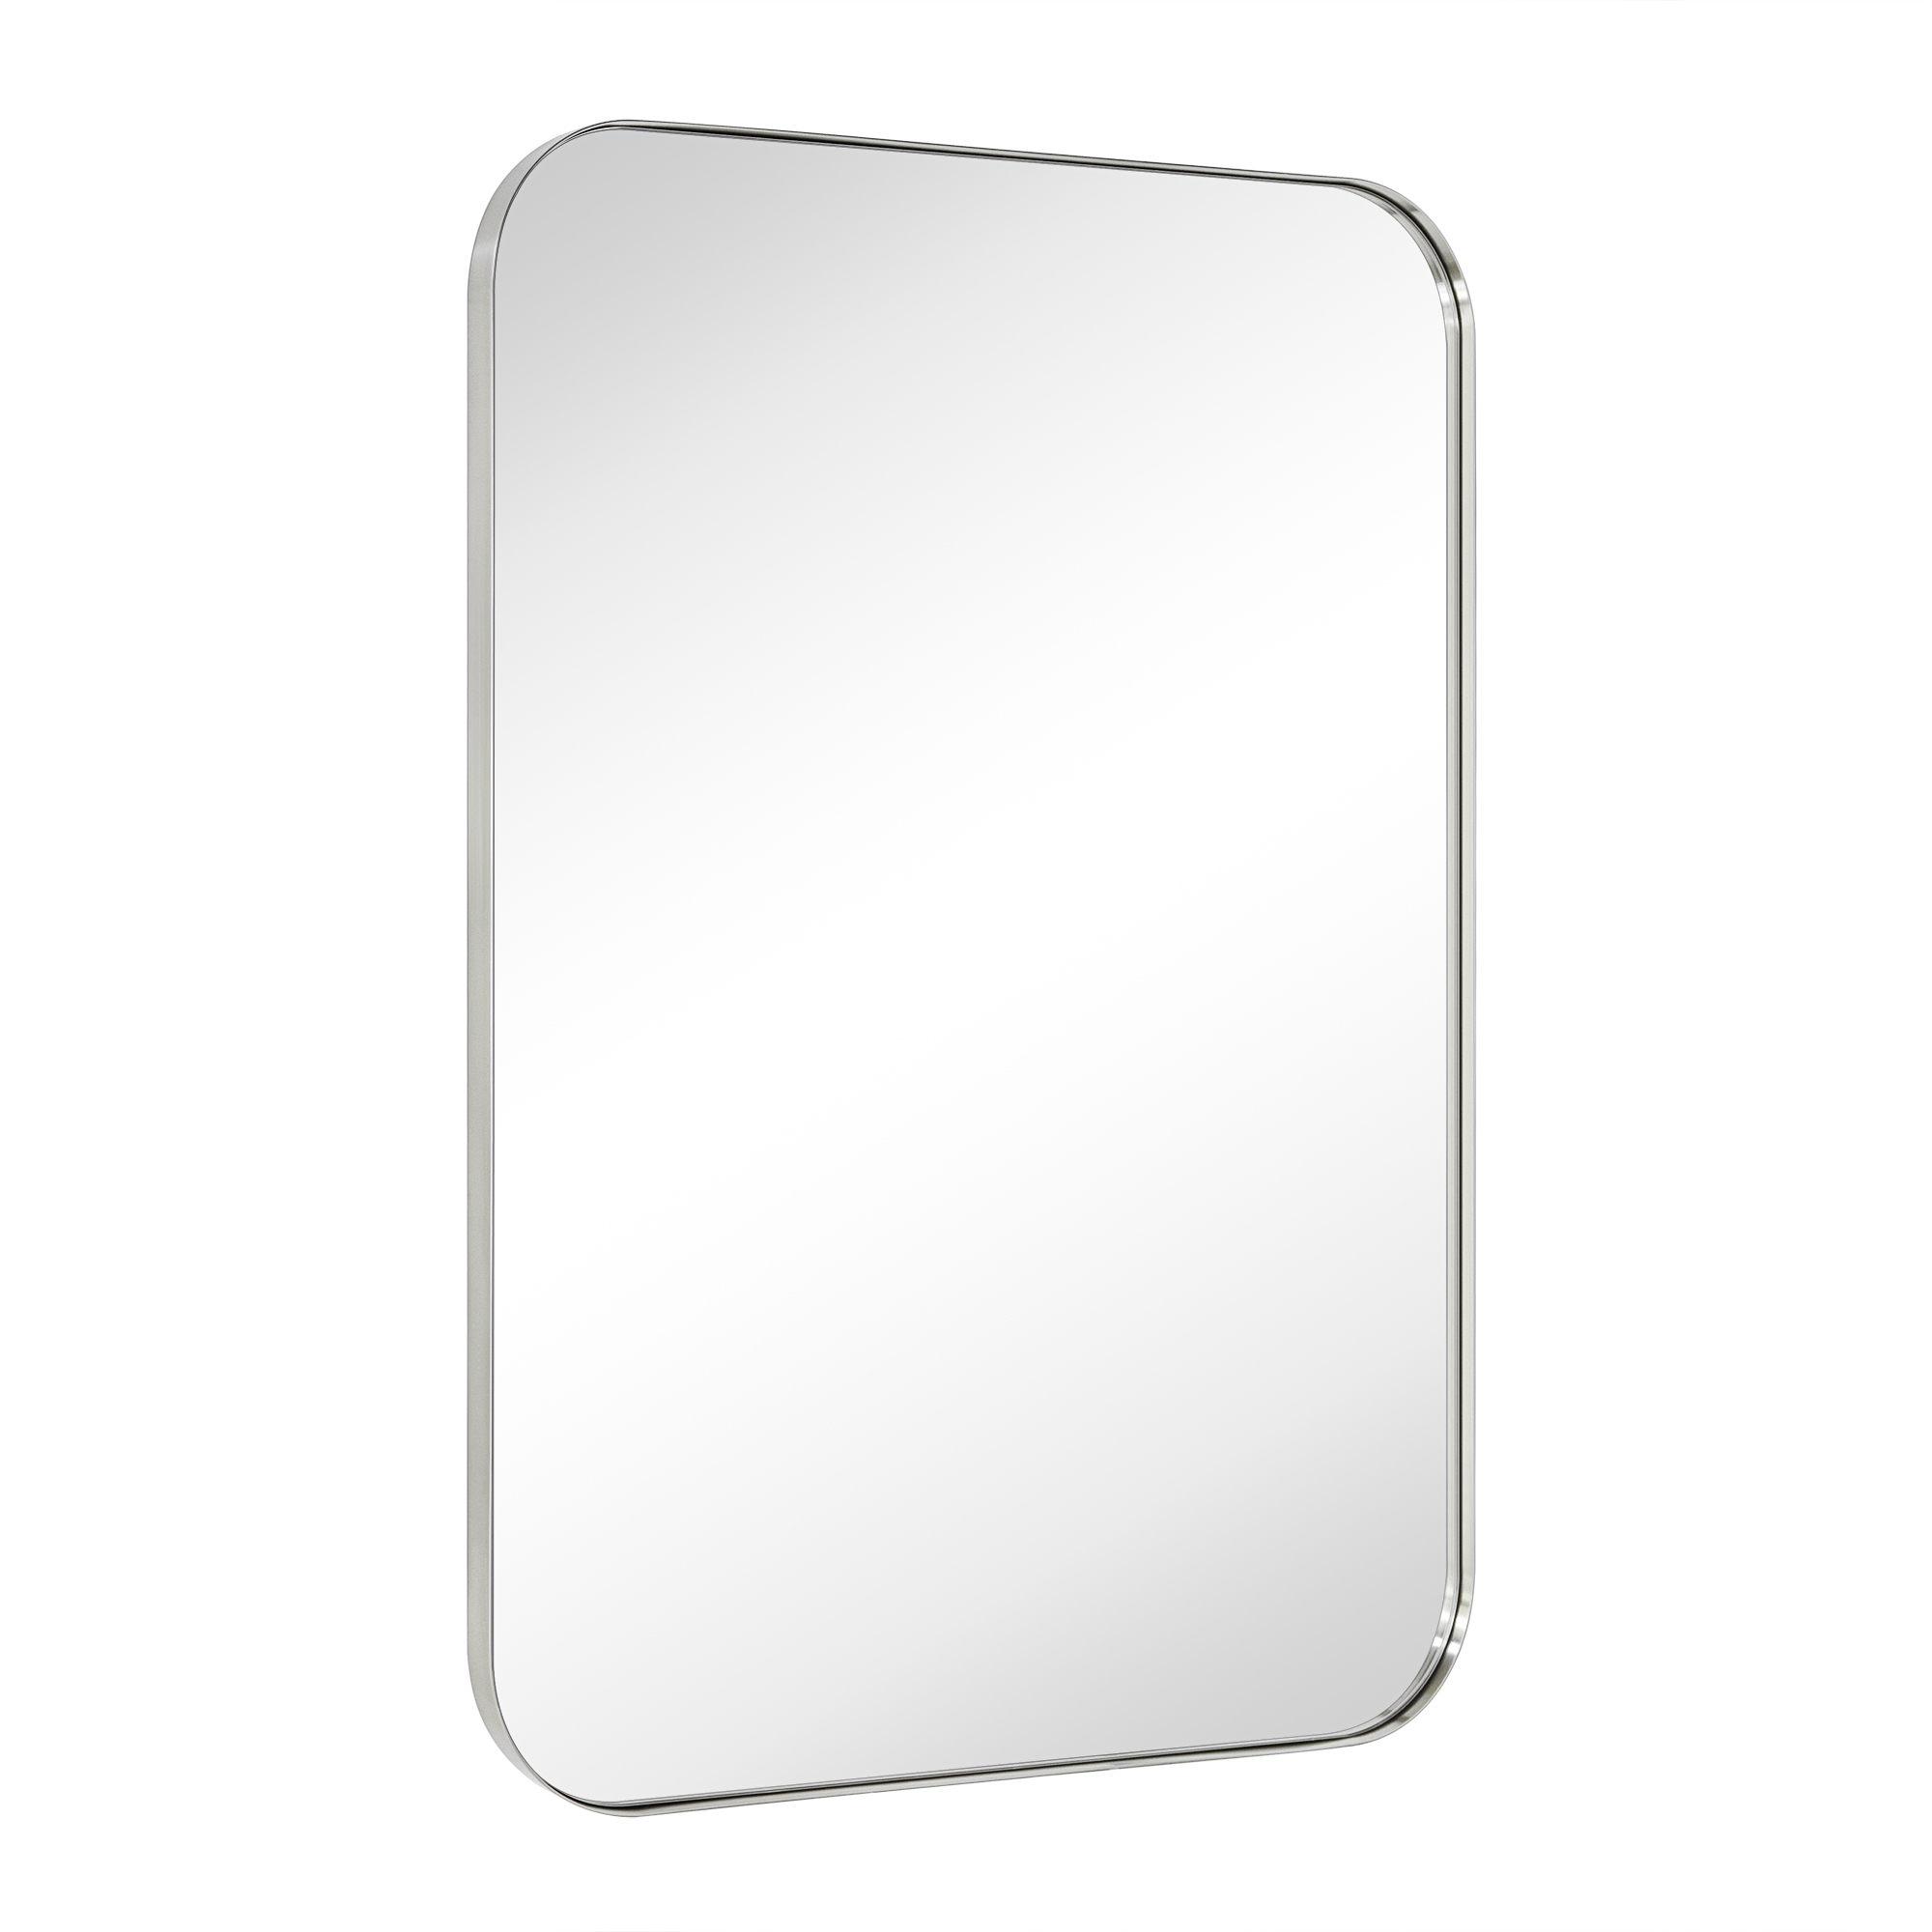 Mid-Century Modern Chic Metal Rounded Wall Mirrors-30x40-Brushed Nickel